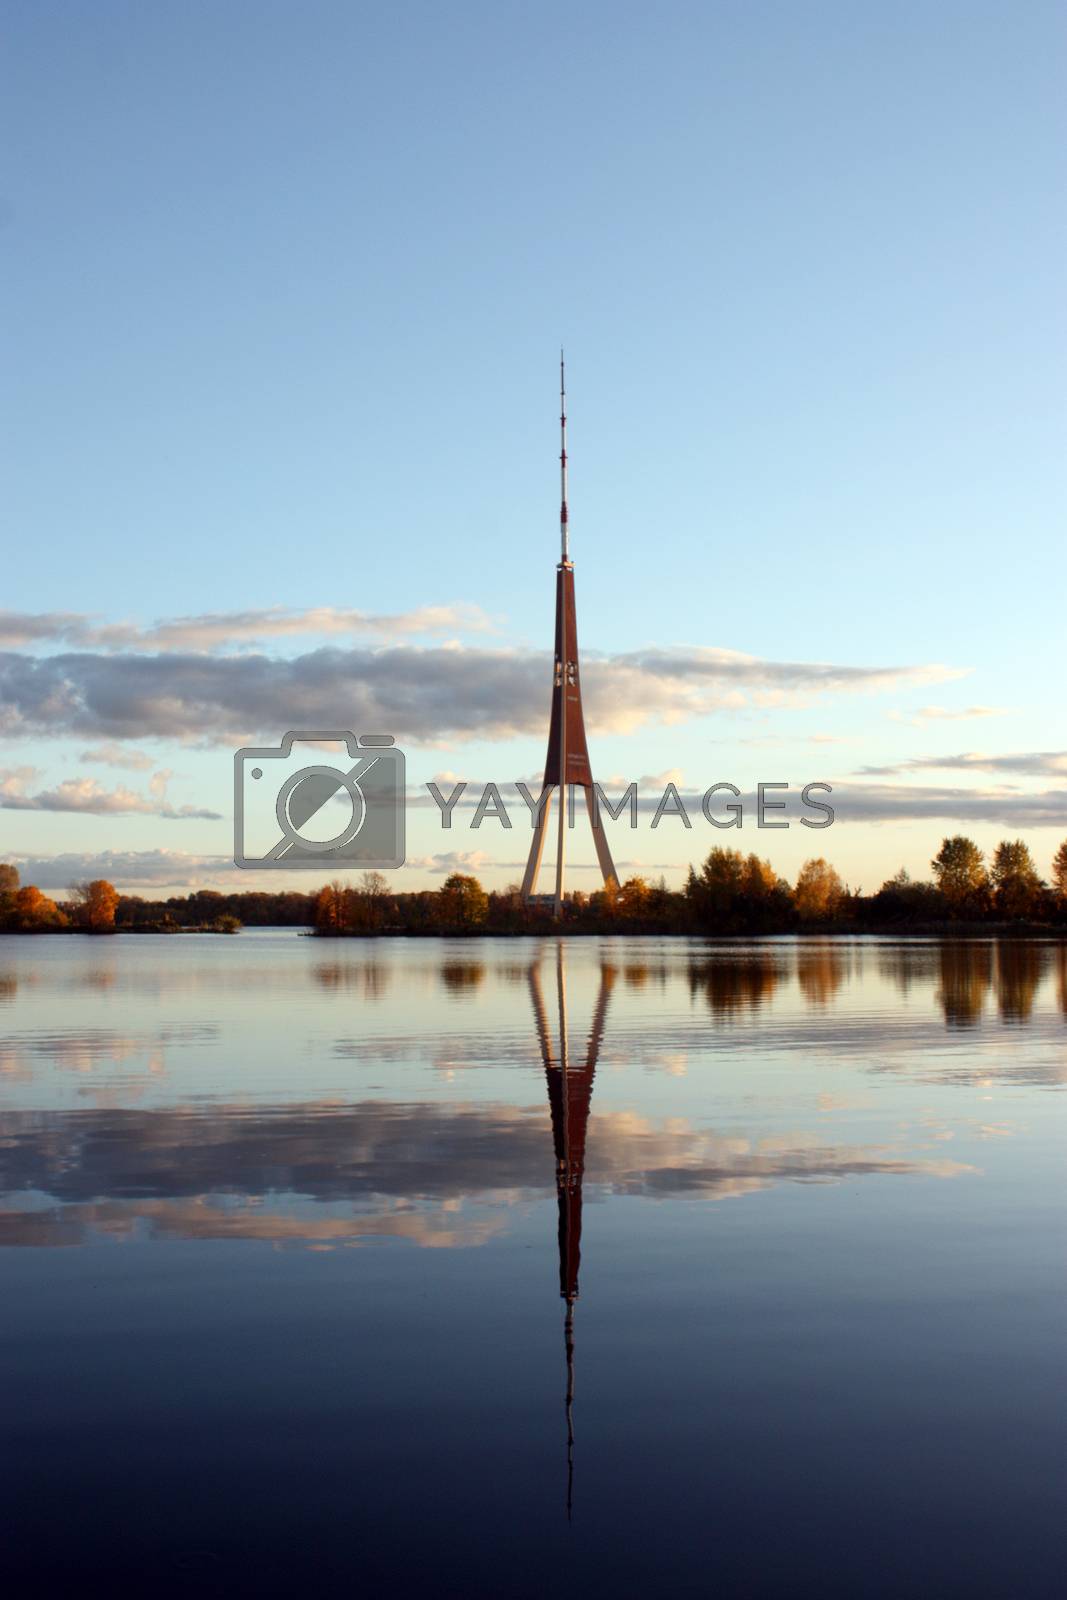 Royalty free image of The tv tower is reflected in the water, in the evening by zakob337